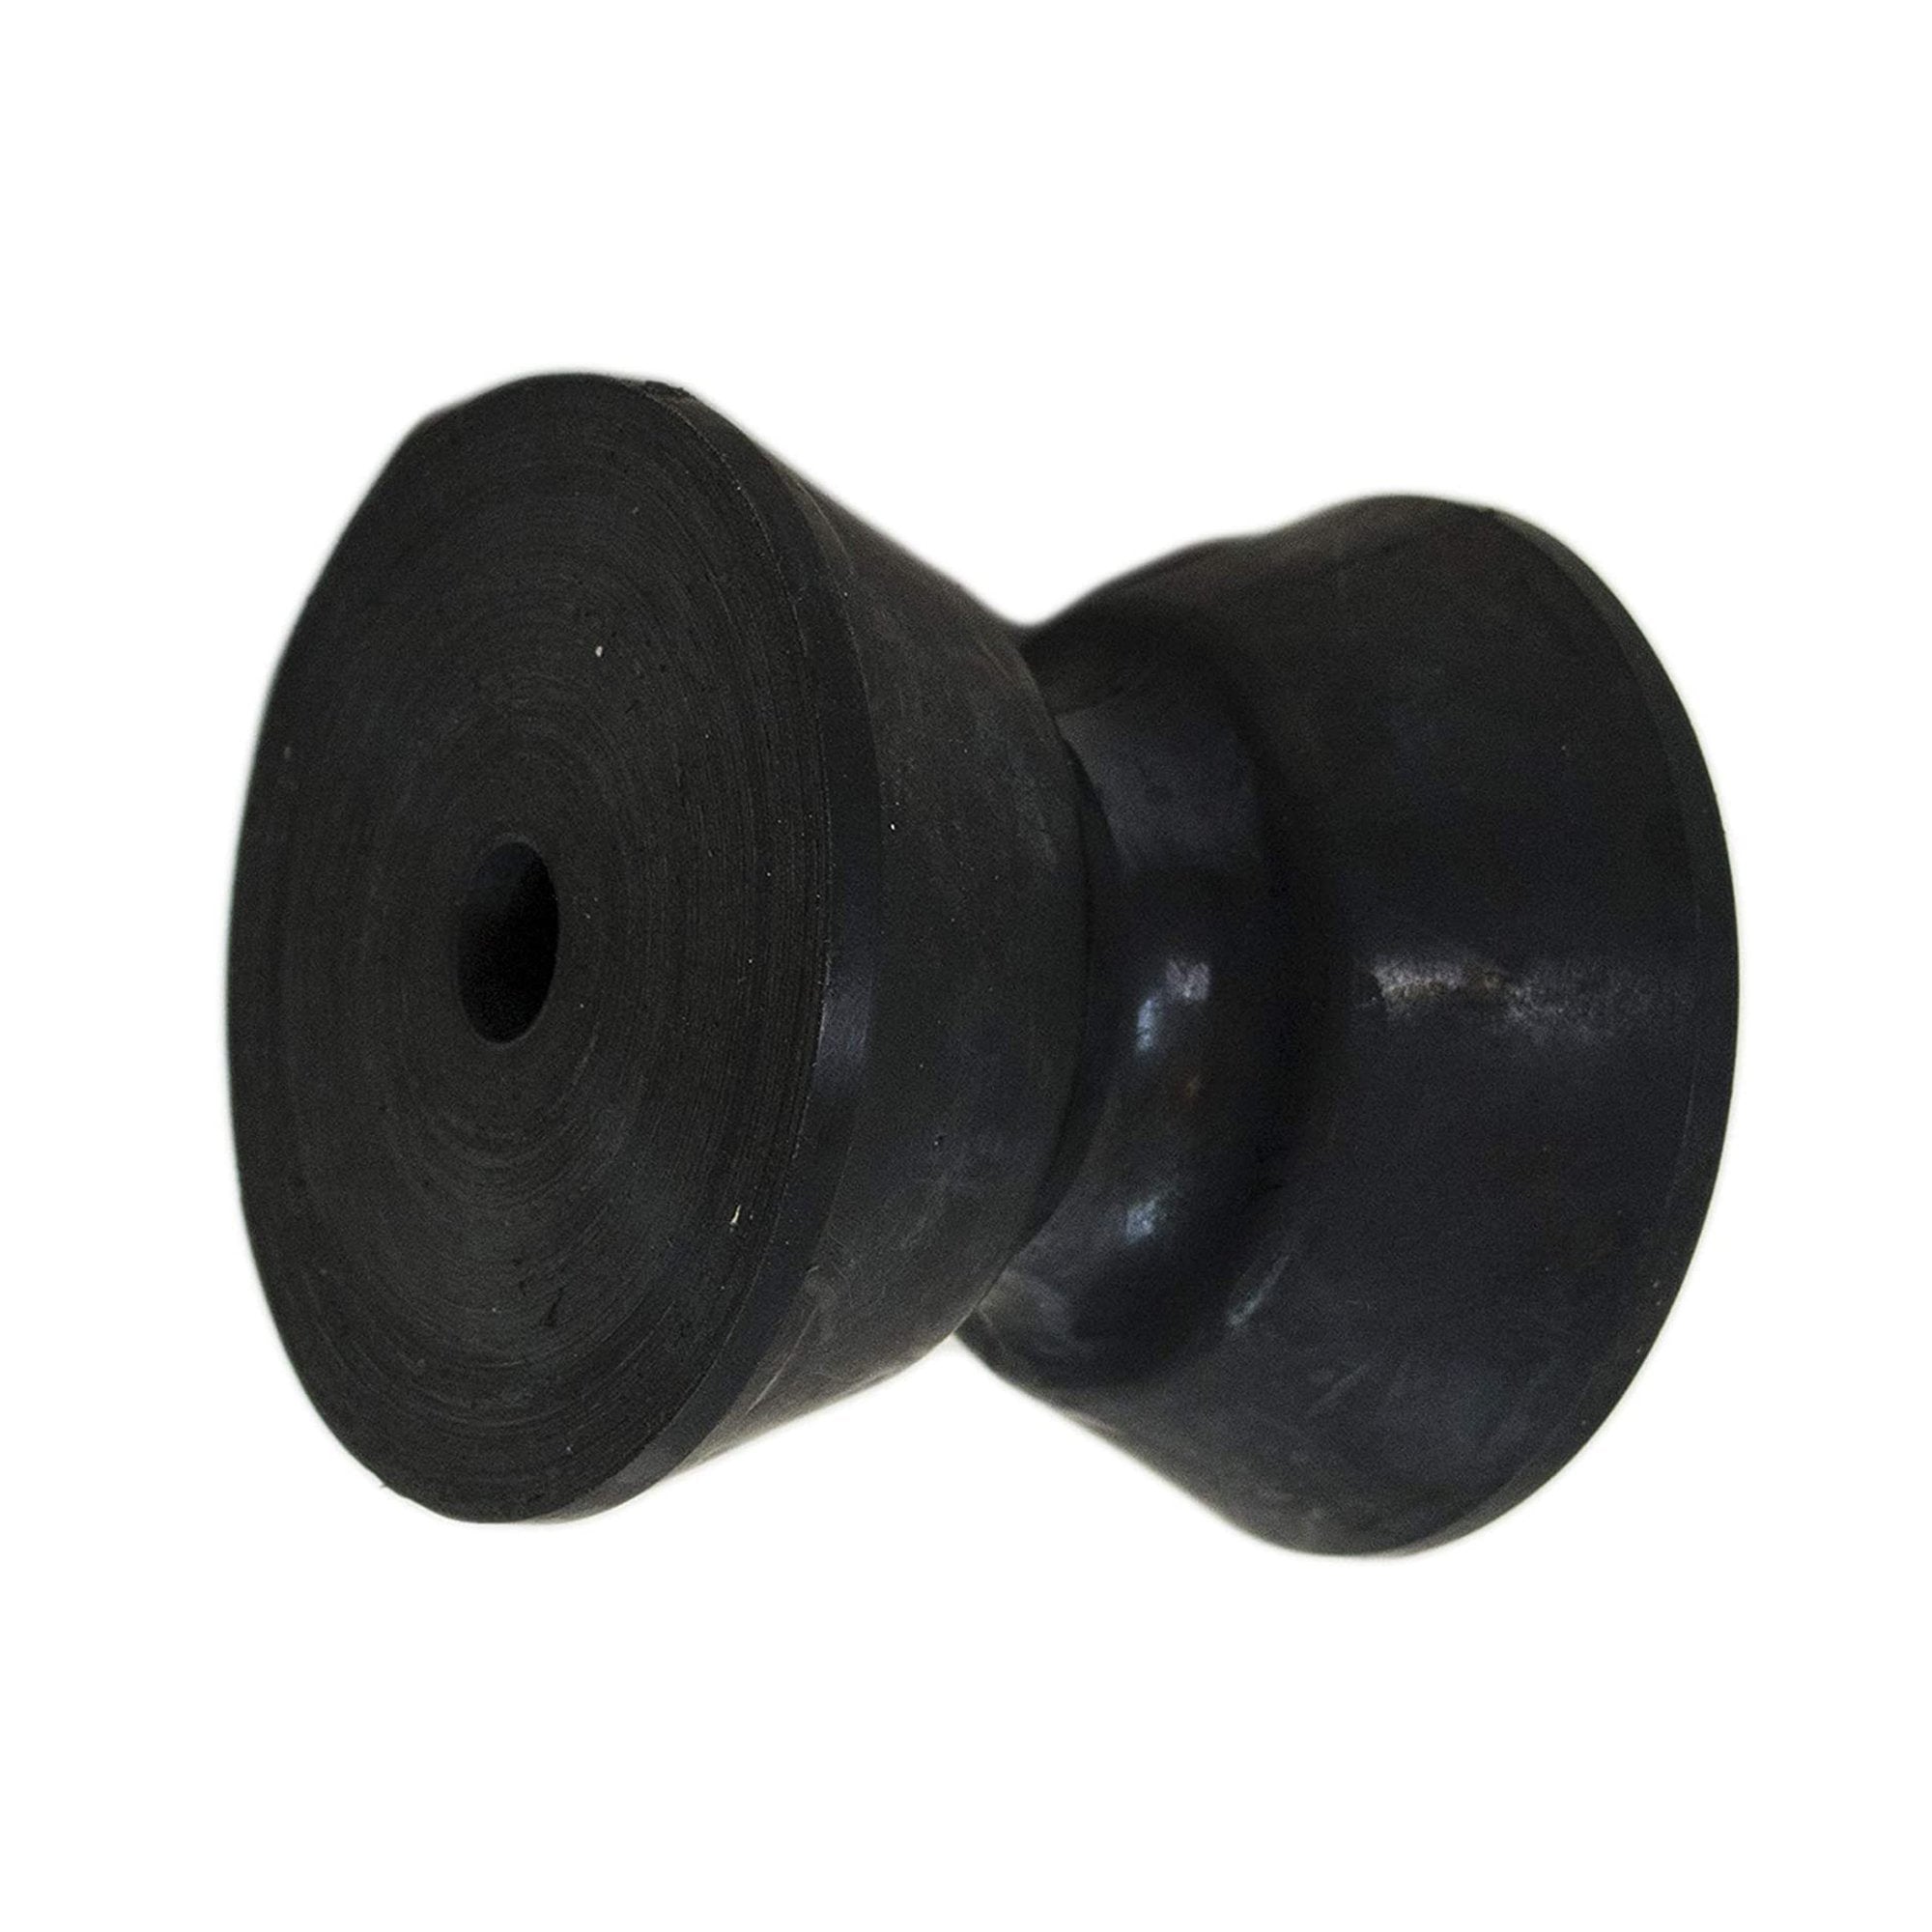 Marine City Black Environmentally Friendly PU Bow Roller for Bow Anchor Roller Holder Replacement Bow Roller (Length: 3 Inches, Center Bolt Hole Diameter: 1/2")